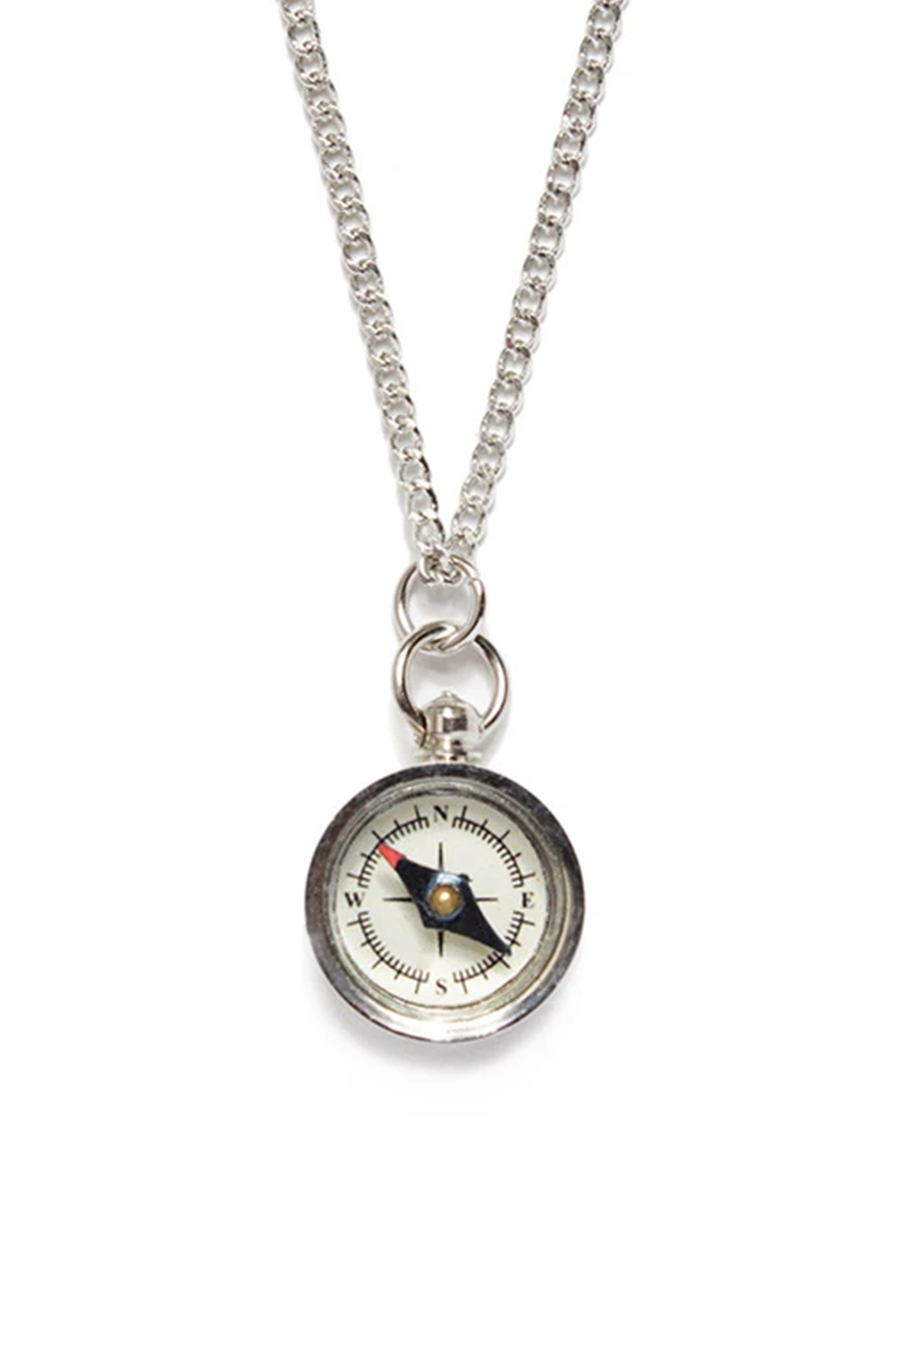 Silver Miniature Compass Necklace - Main Image Number 1 of 2